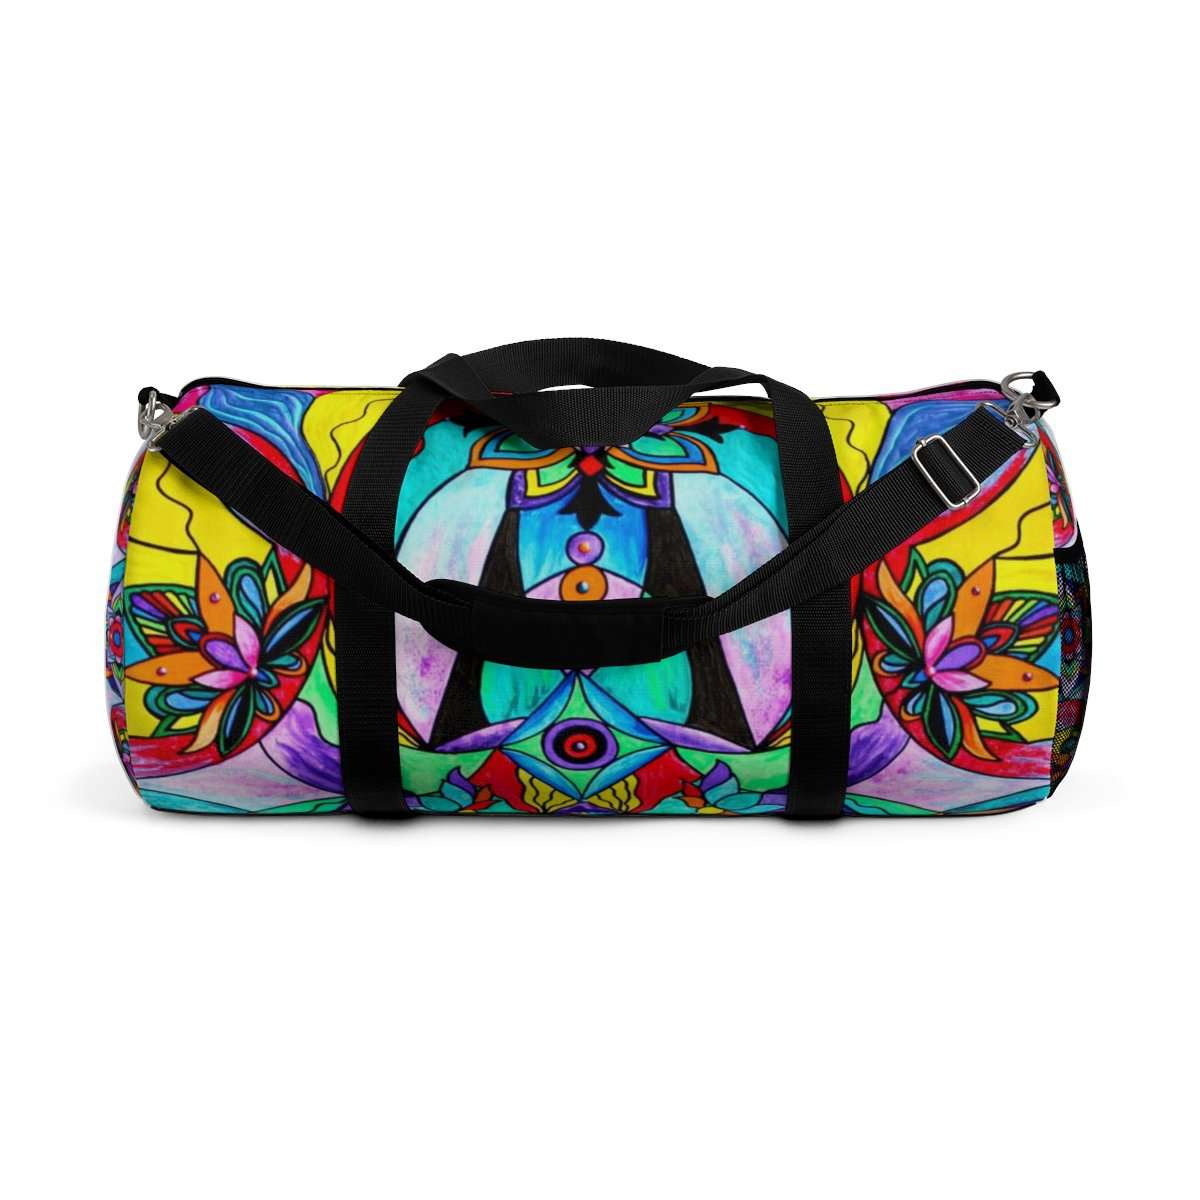 a-place-to-buy-receive-duffle-bag-online-now_6.jpg